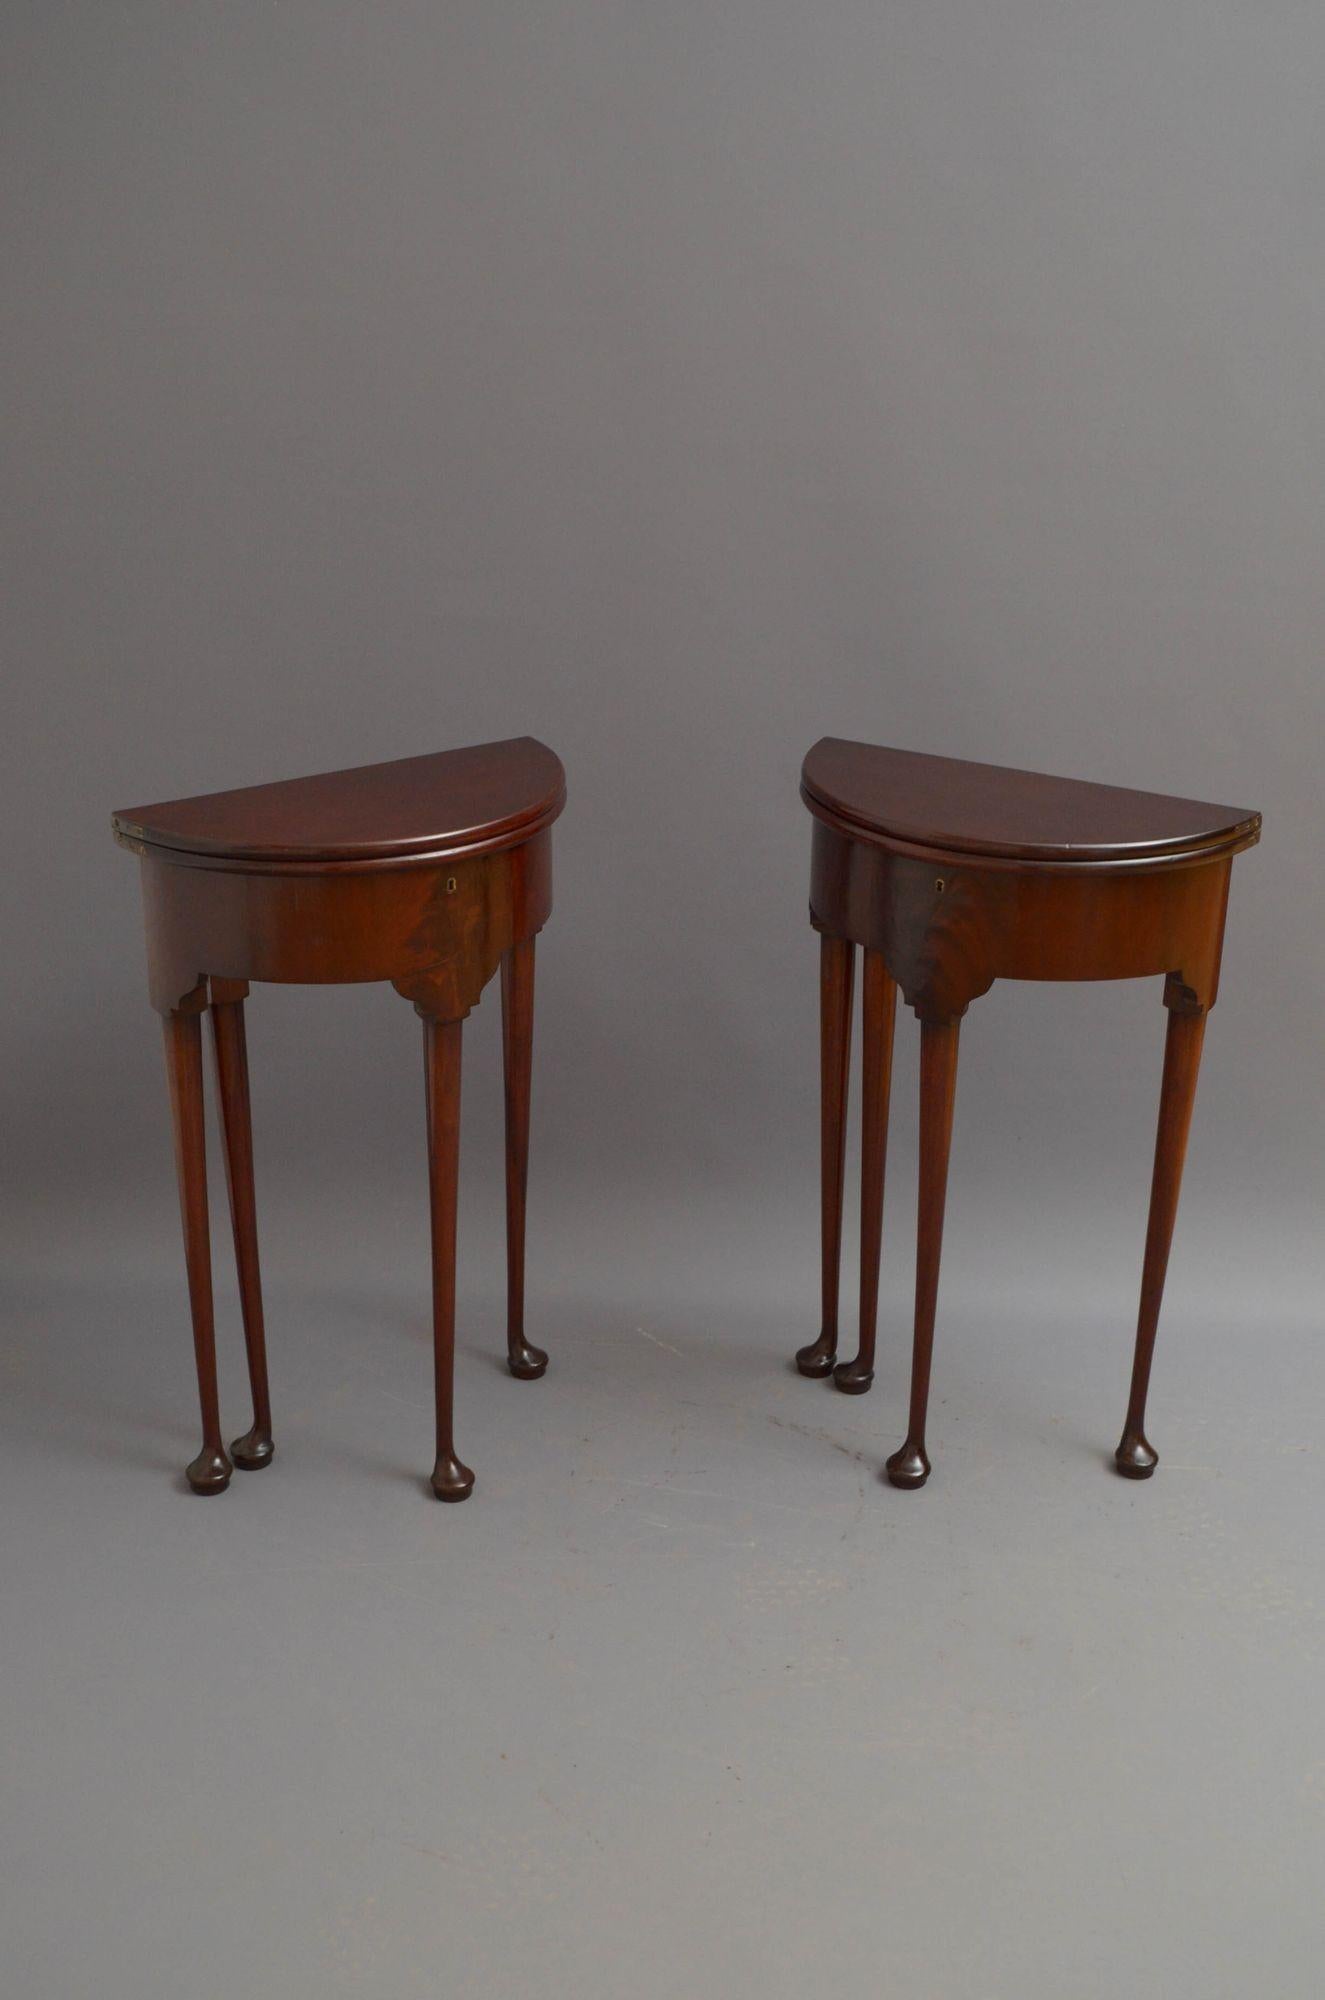 Sn5406 Pair of fine quality George II solid mahogany, demi lune occasional tables of narrow proportions, each having figured mahogany fold over top enclosing small storage space, flamed mahogany frieze and four slender legs terminating in pad feet.